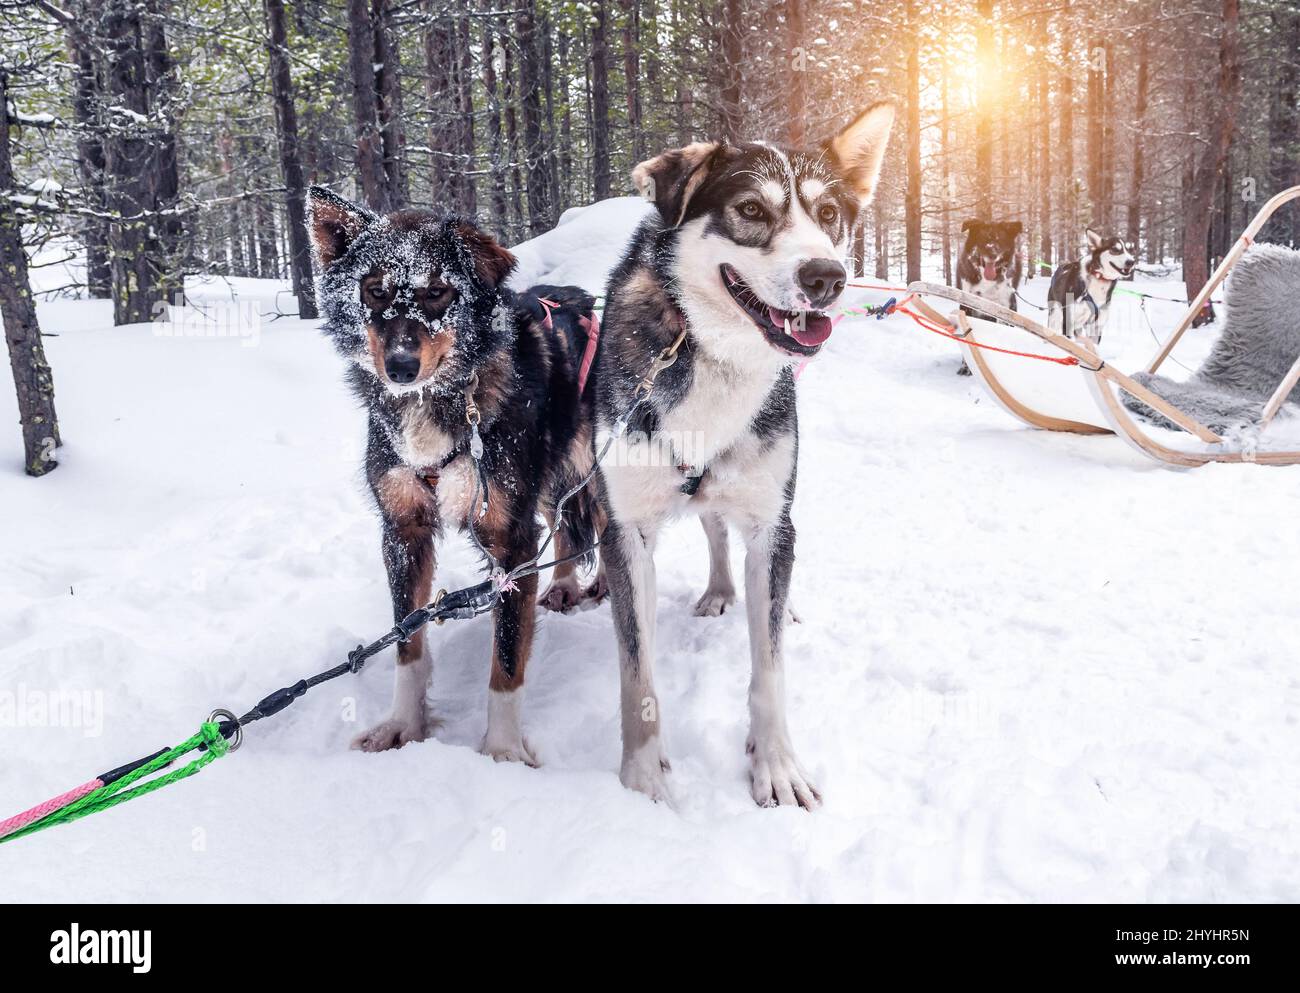 Alaskan huskies dog sled ride in the beautiful snowy forest, Finland, Lapland. Stock Photo